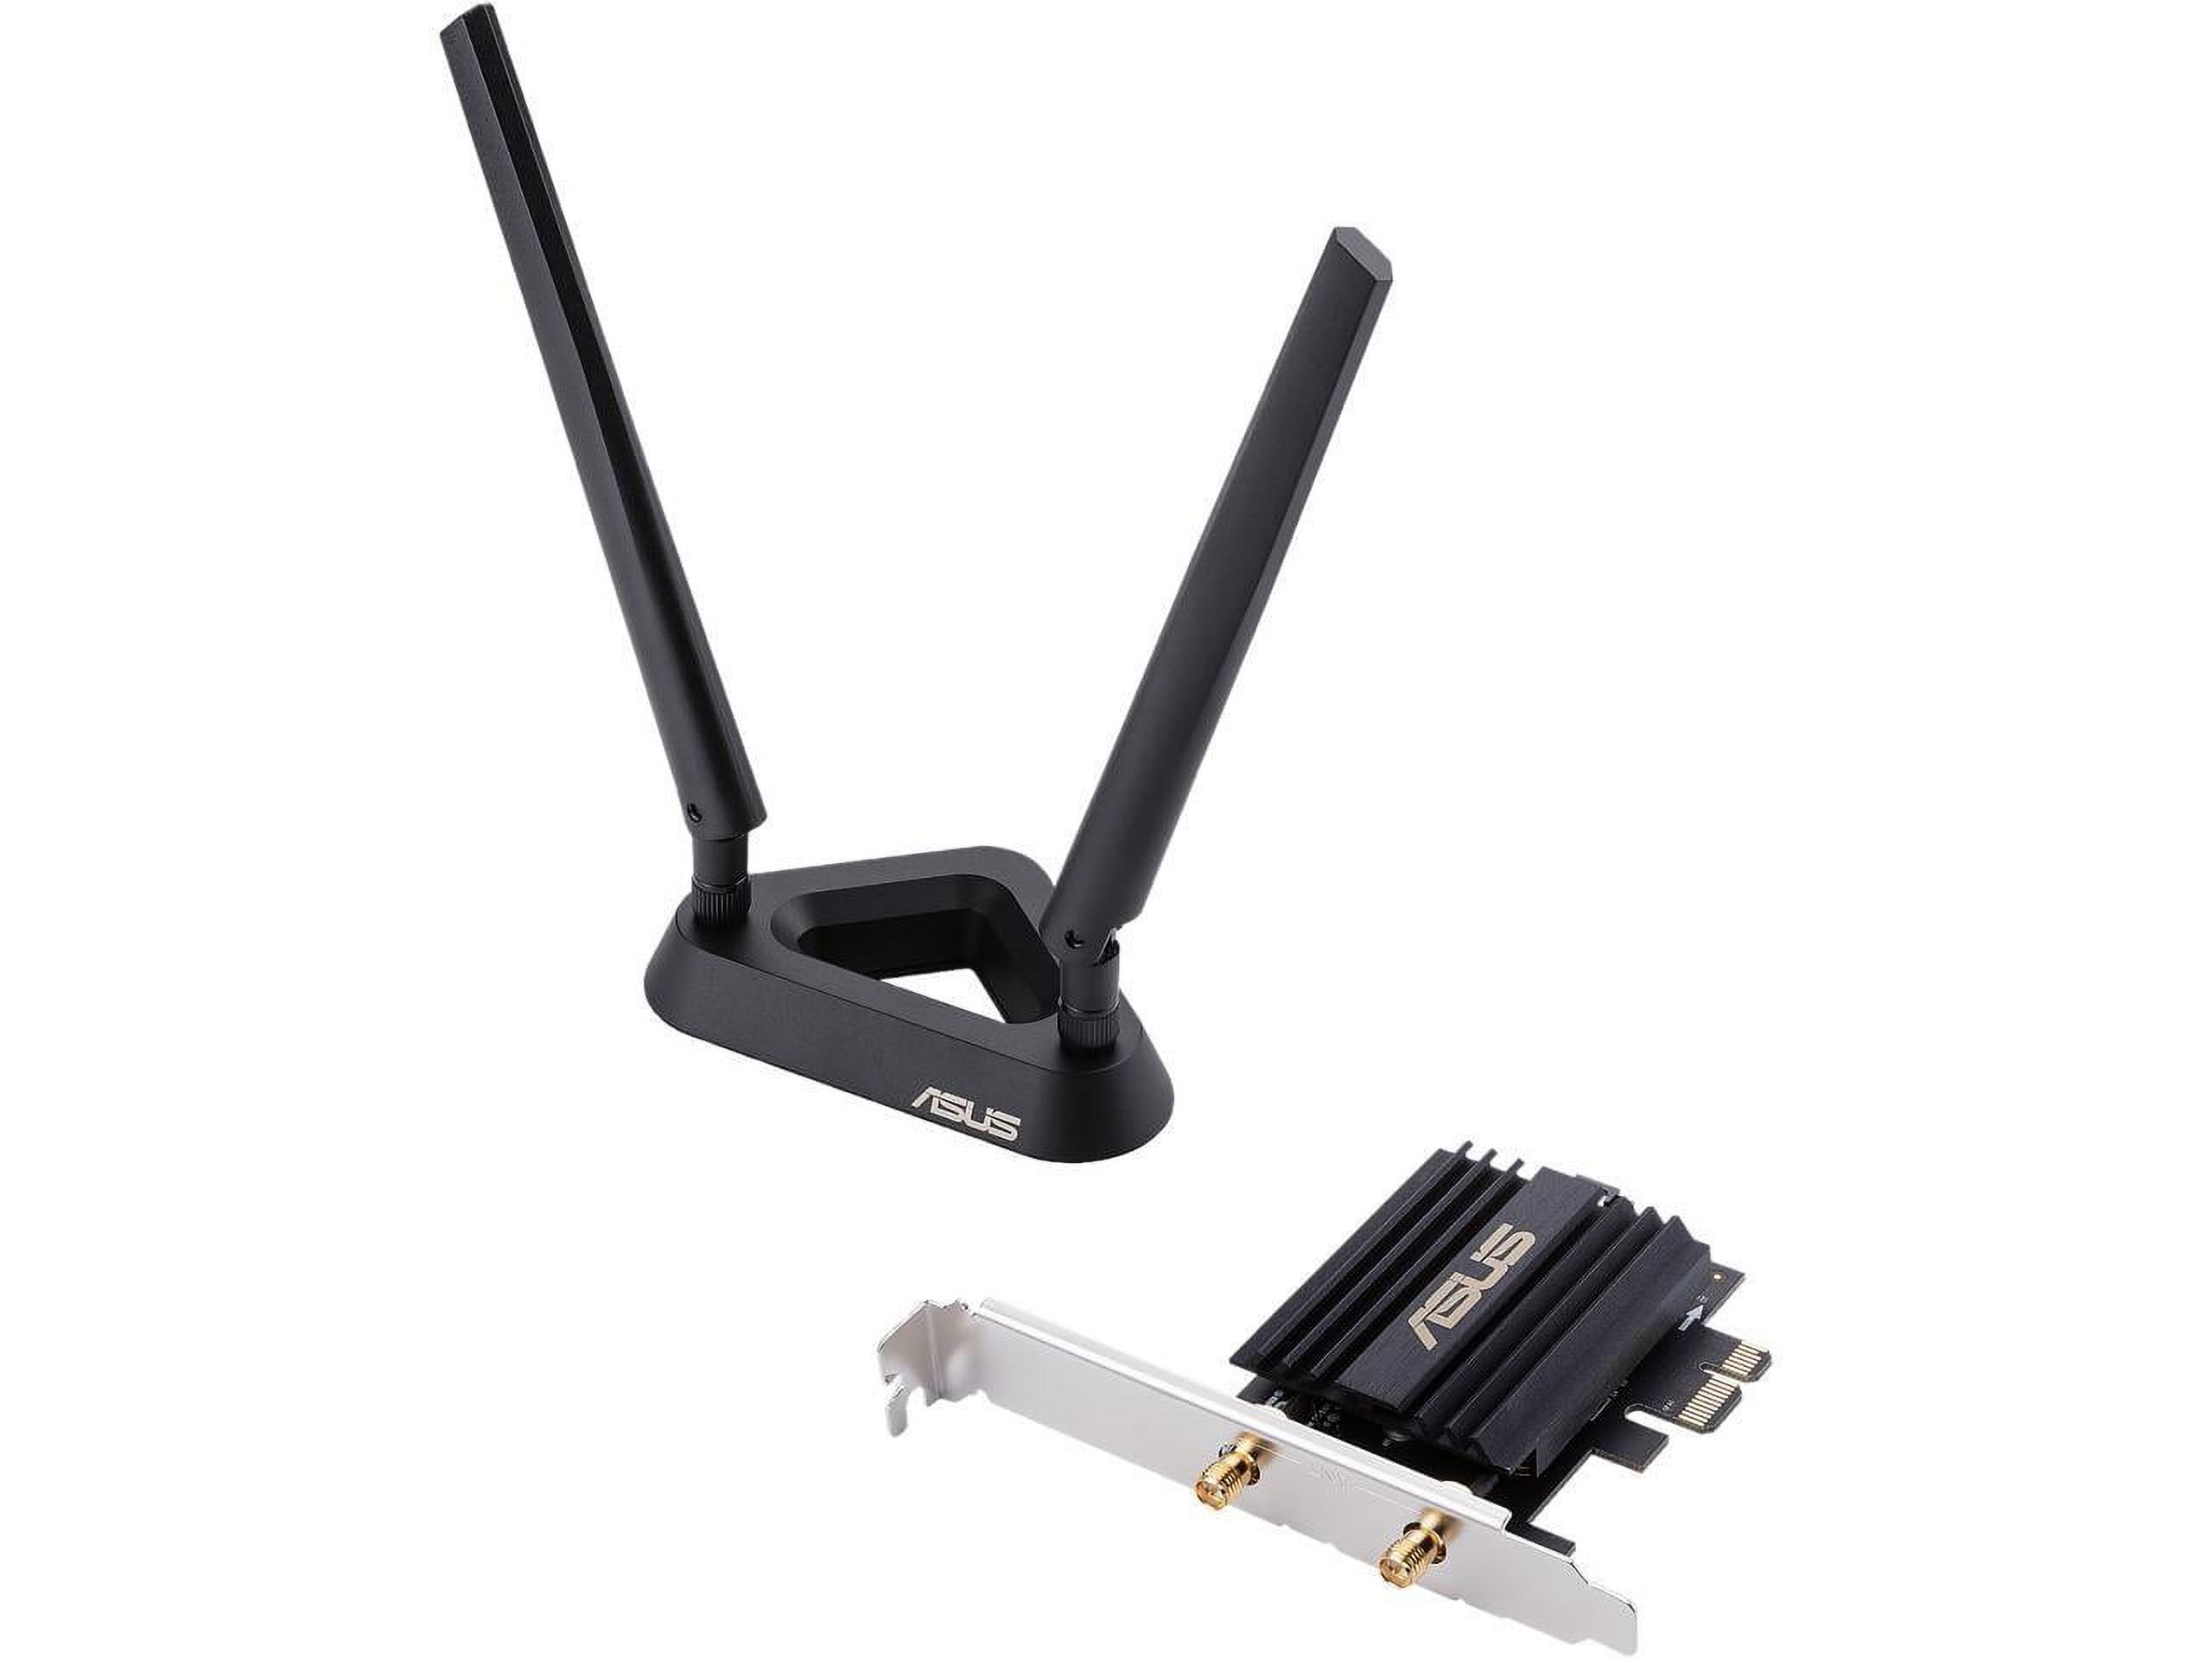 ASUS AX3000 (PCE-AX58BT) Next-Gen WiFi 6 Dual Band PCIe Wireless Adapter with Bluetooth 5.0 - OFDMA, 2x2 MU-MIMO and WPA3 Security - image 1 of 11